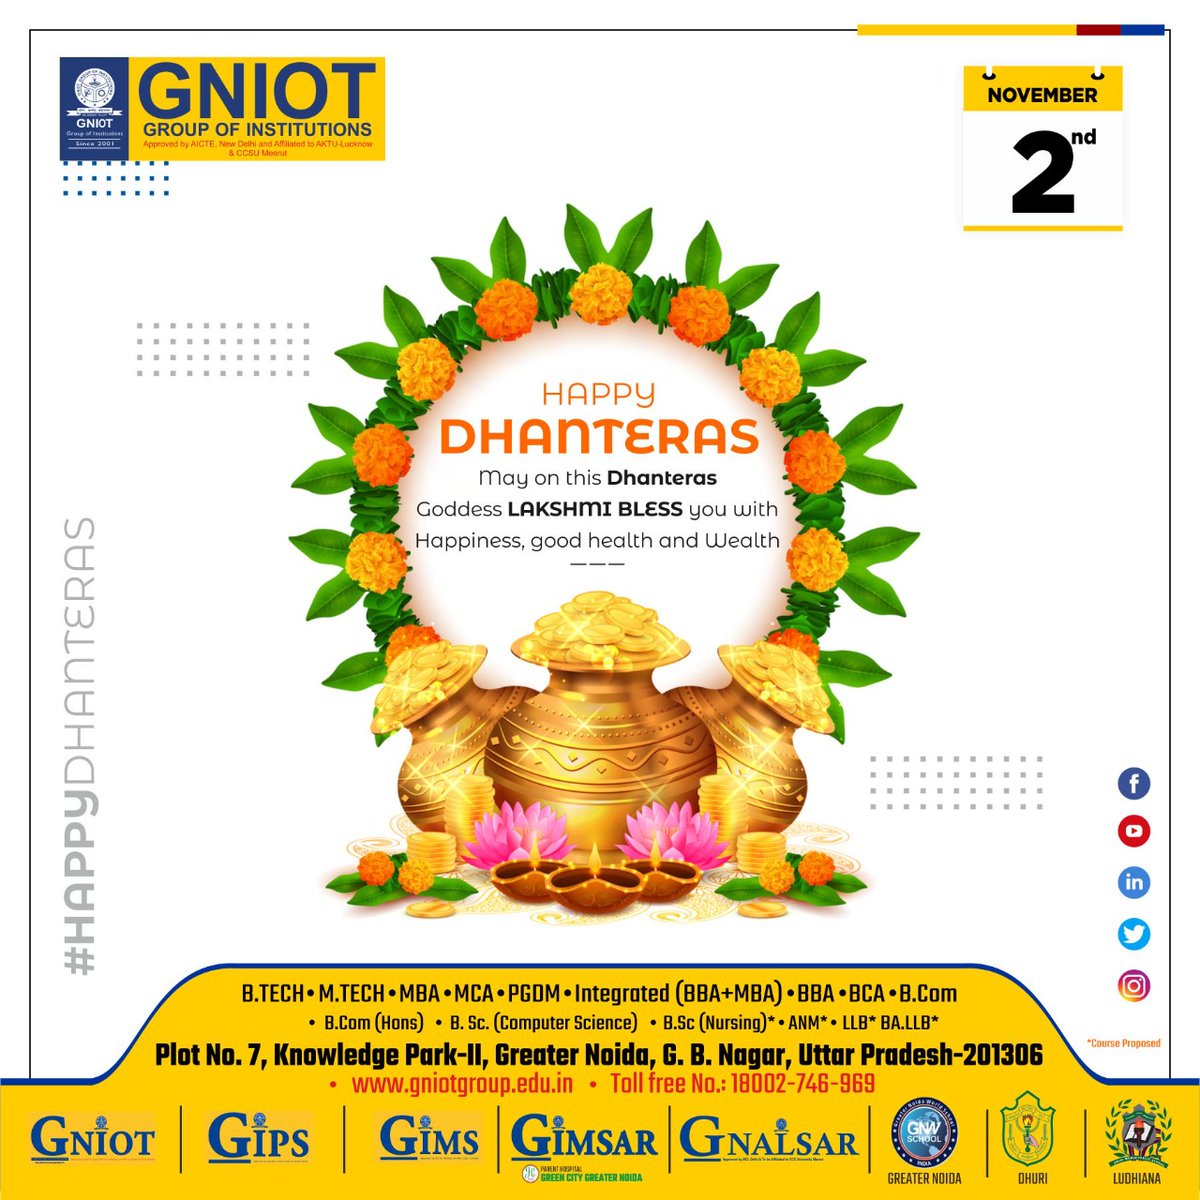 Happy Dhanteras. May on this Dhanteras goddess Lakshmi bless you with happiness, good health and wealth. #HappyDhanteras #Dhanteras #GNIOT #GNIOTGreaterNoida #GreaterNoidaCollege #College #Institute #GIMS #GIPS #GNIOTMBAInstitute